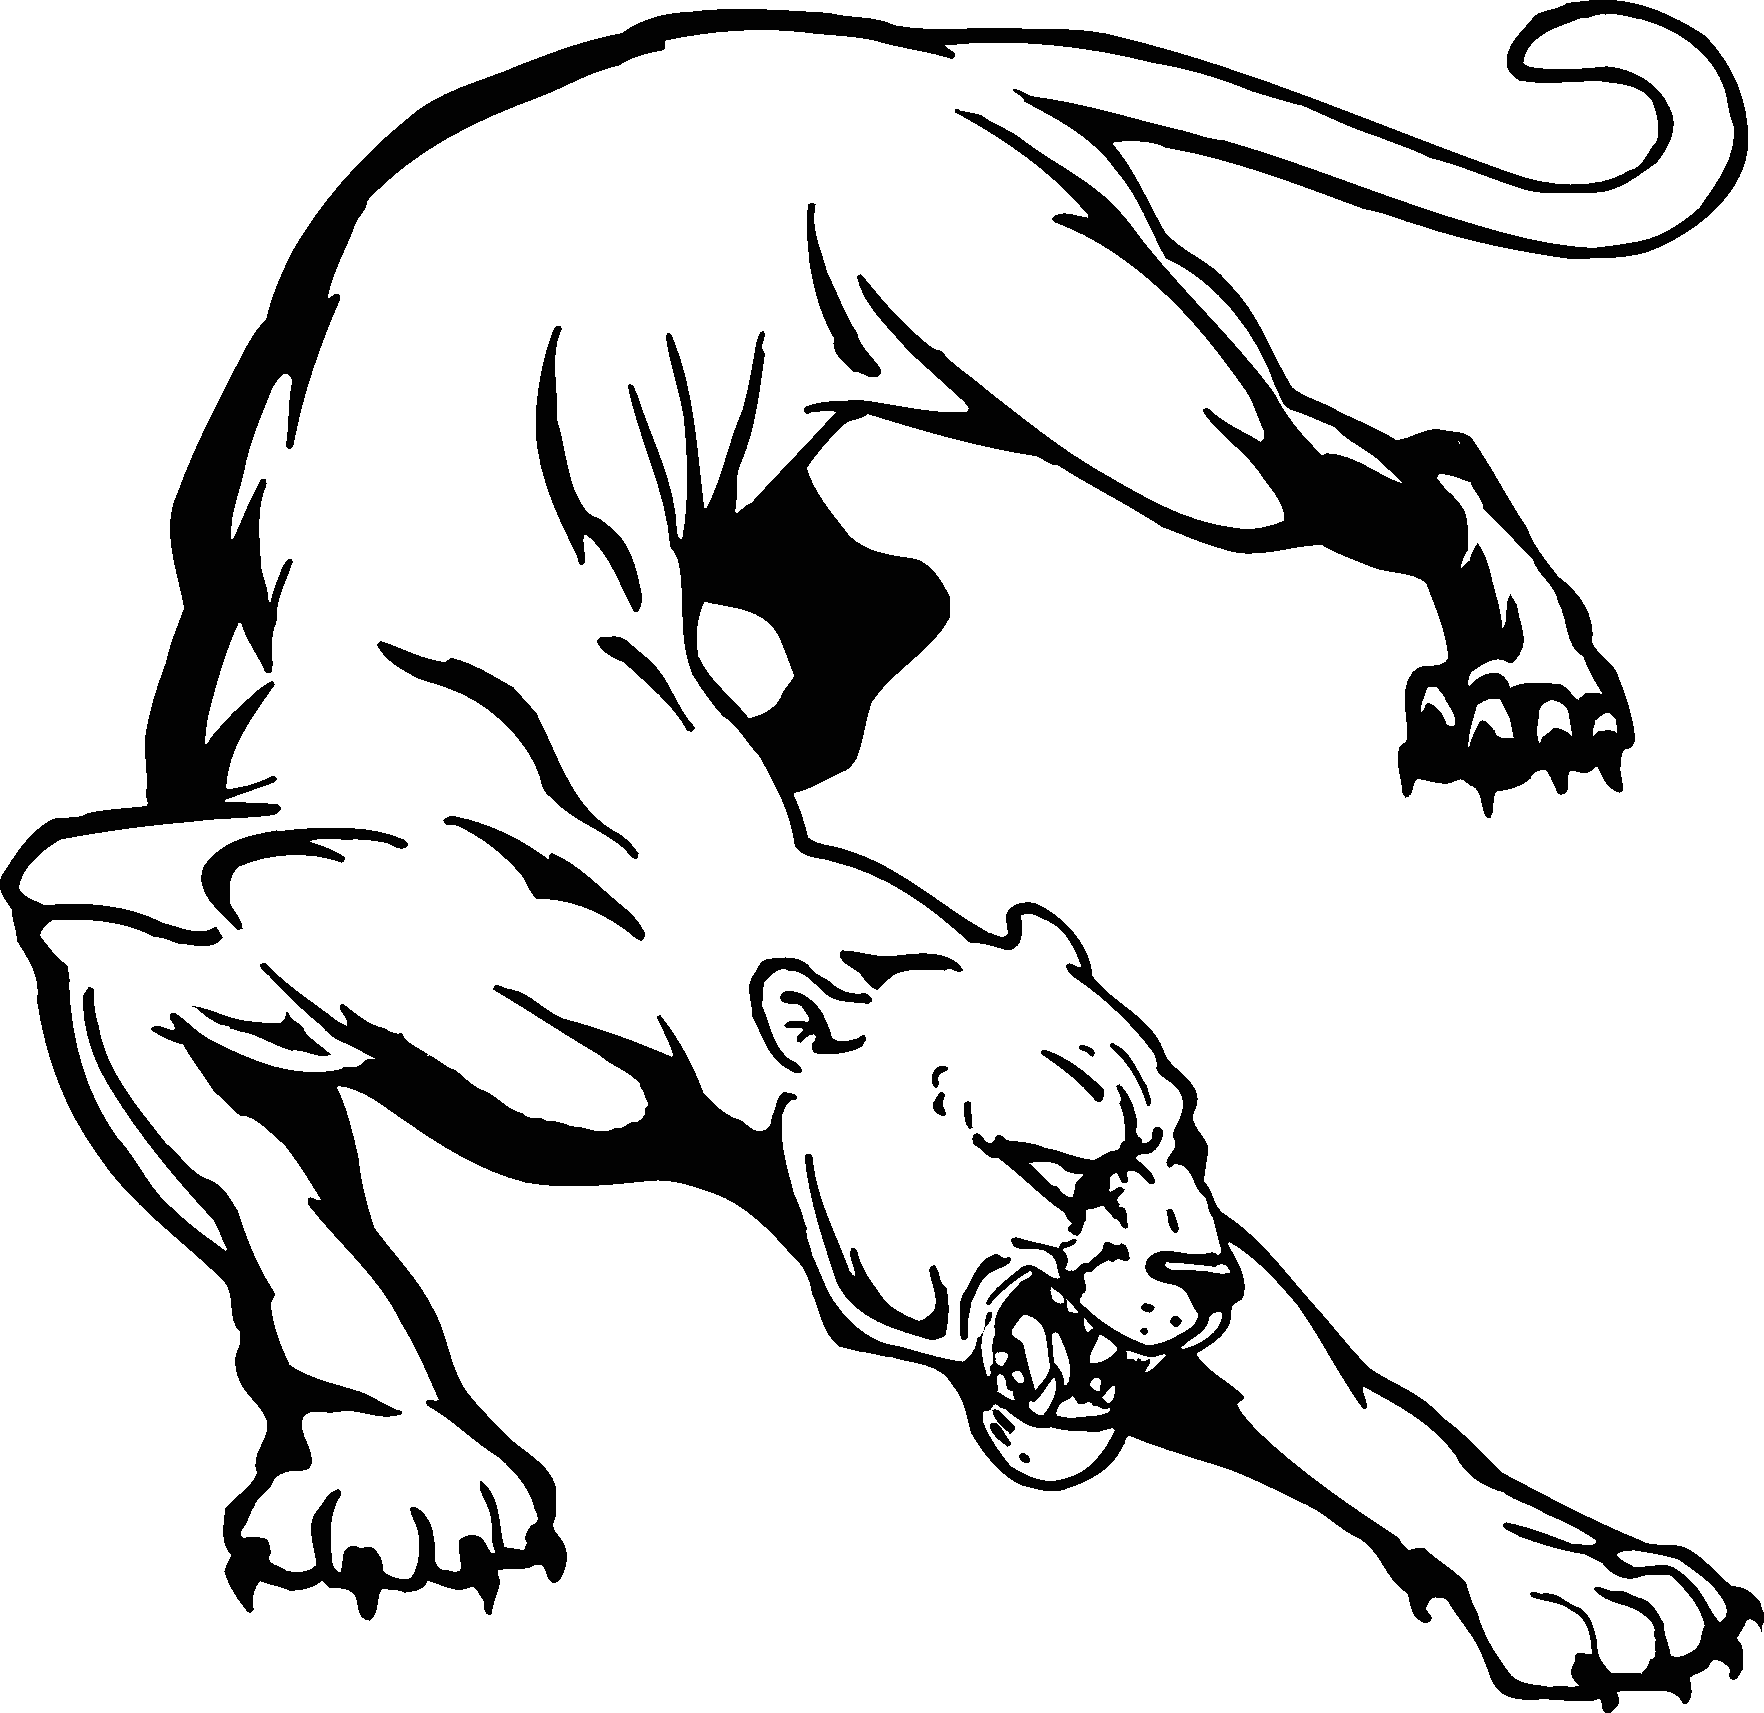 Panther clipart clipart